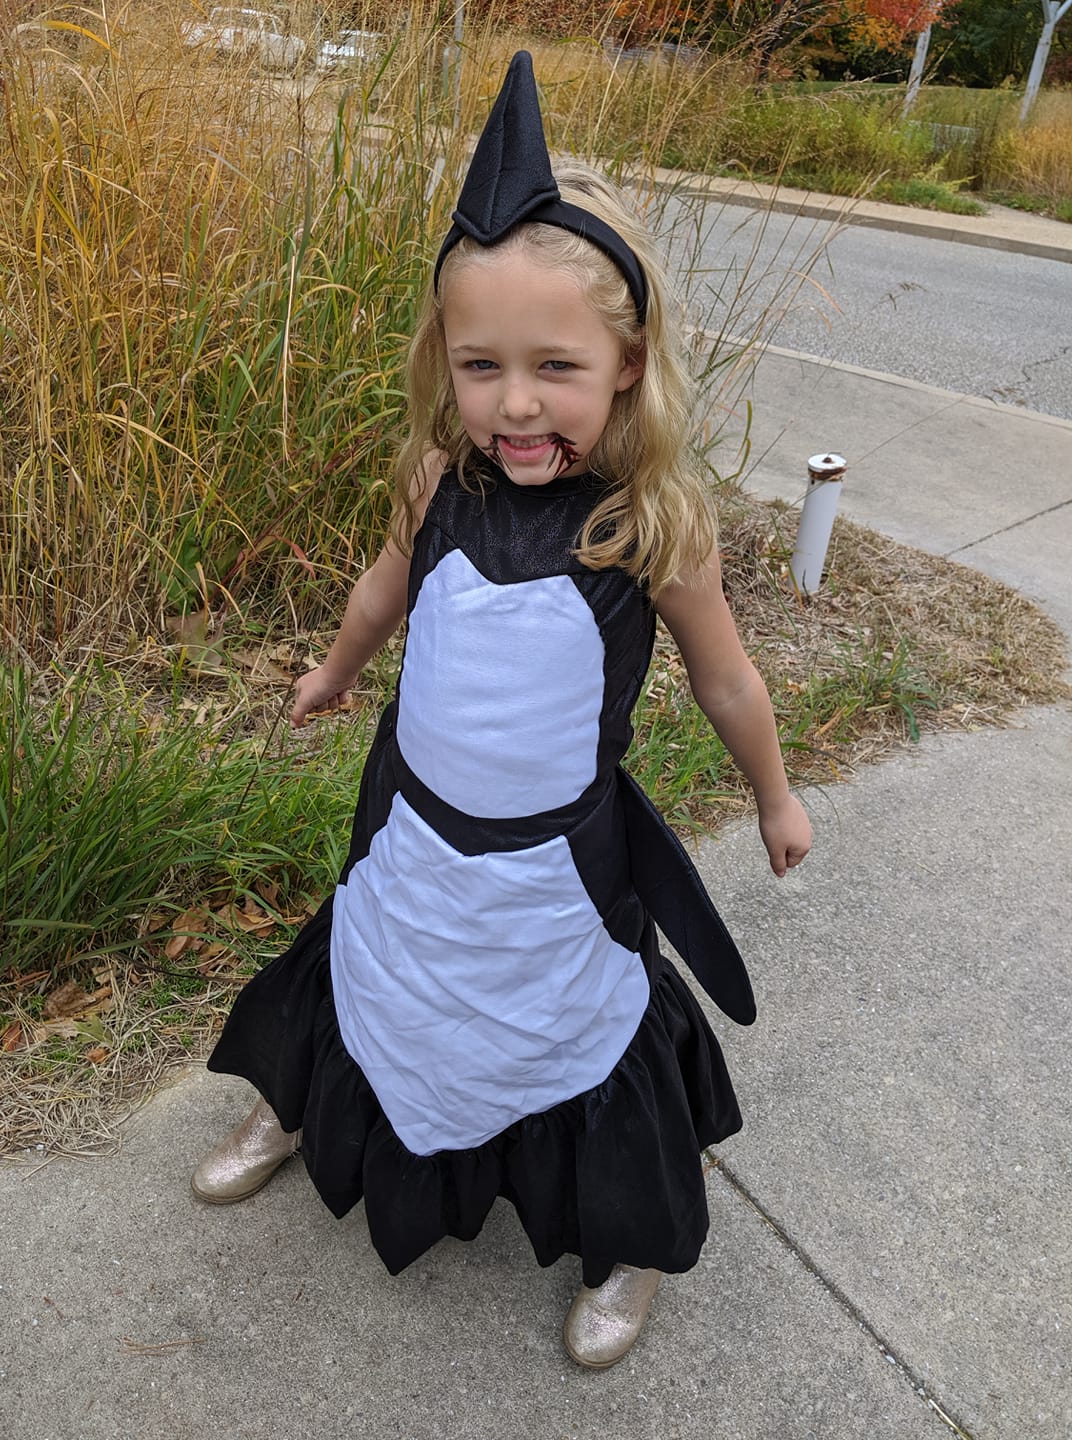 The 2019 Mommy Shorts Halloween Costume Awards